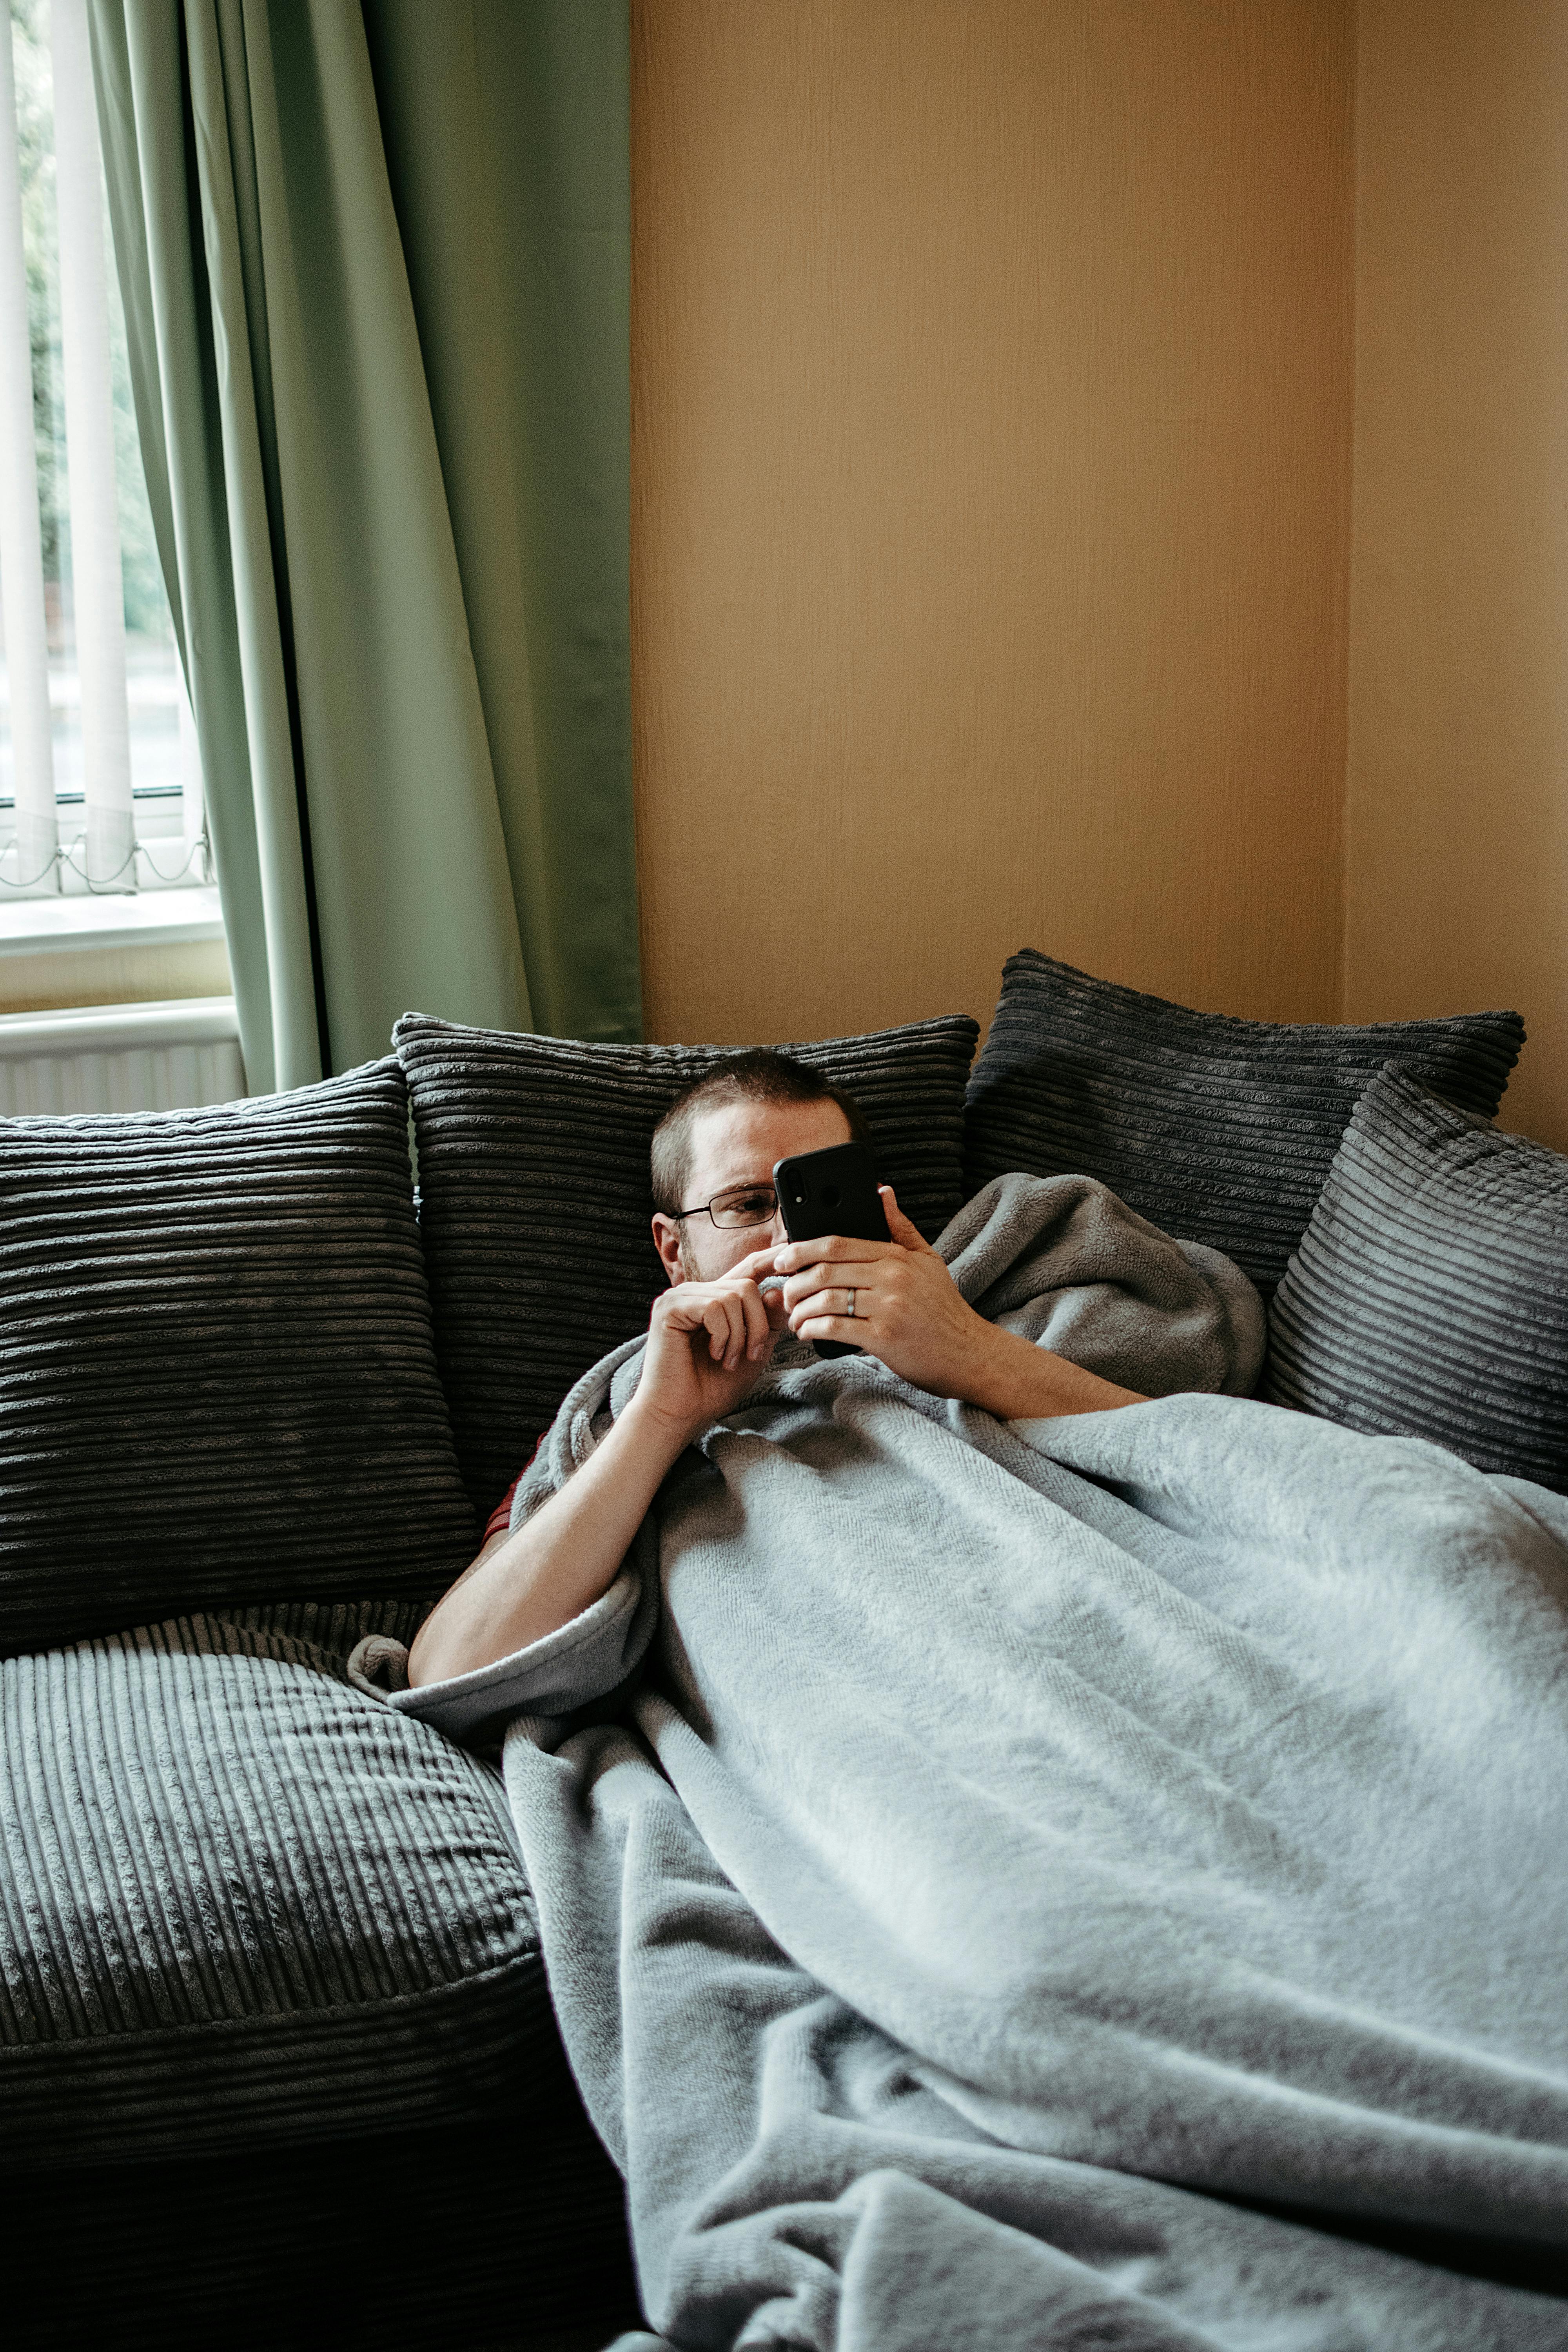 A man lazying around on a couch while using his phone | Source: Pexels